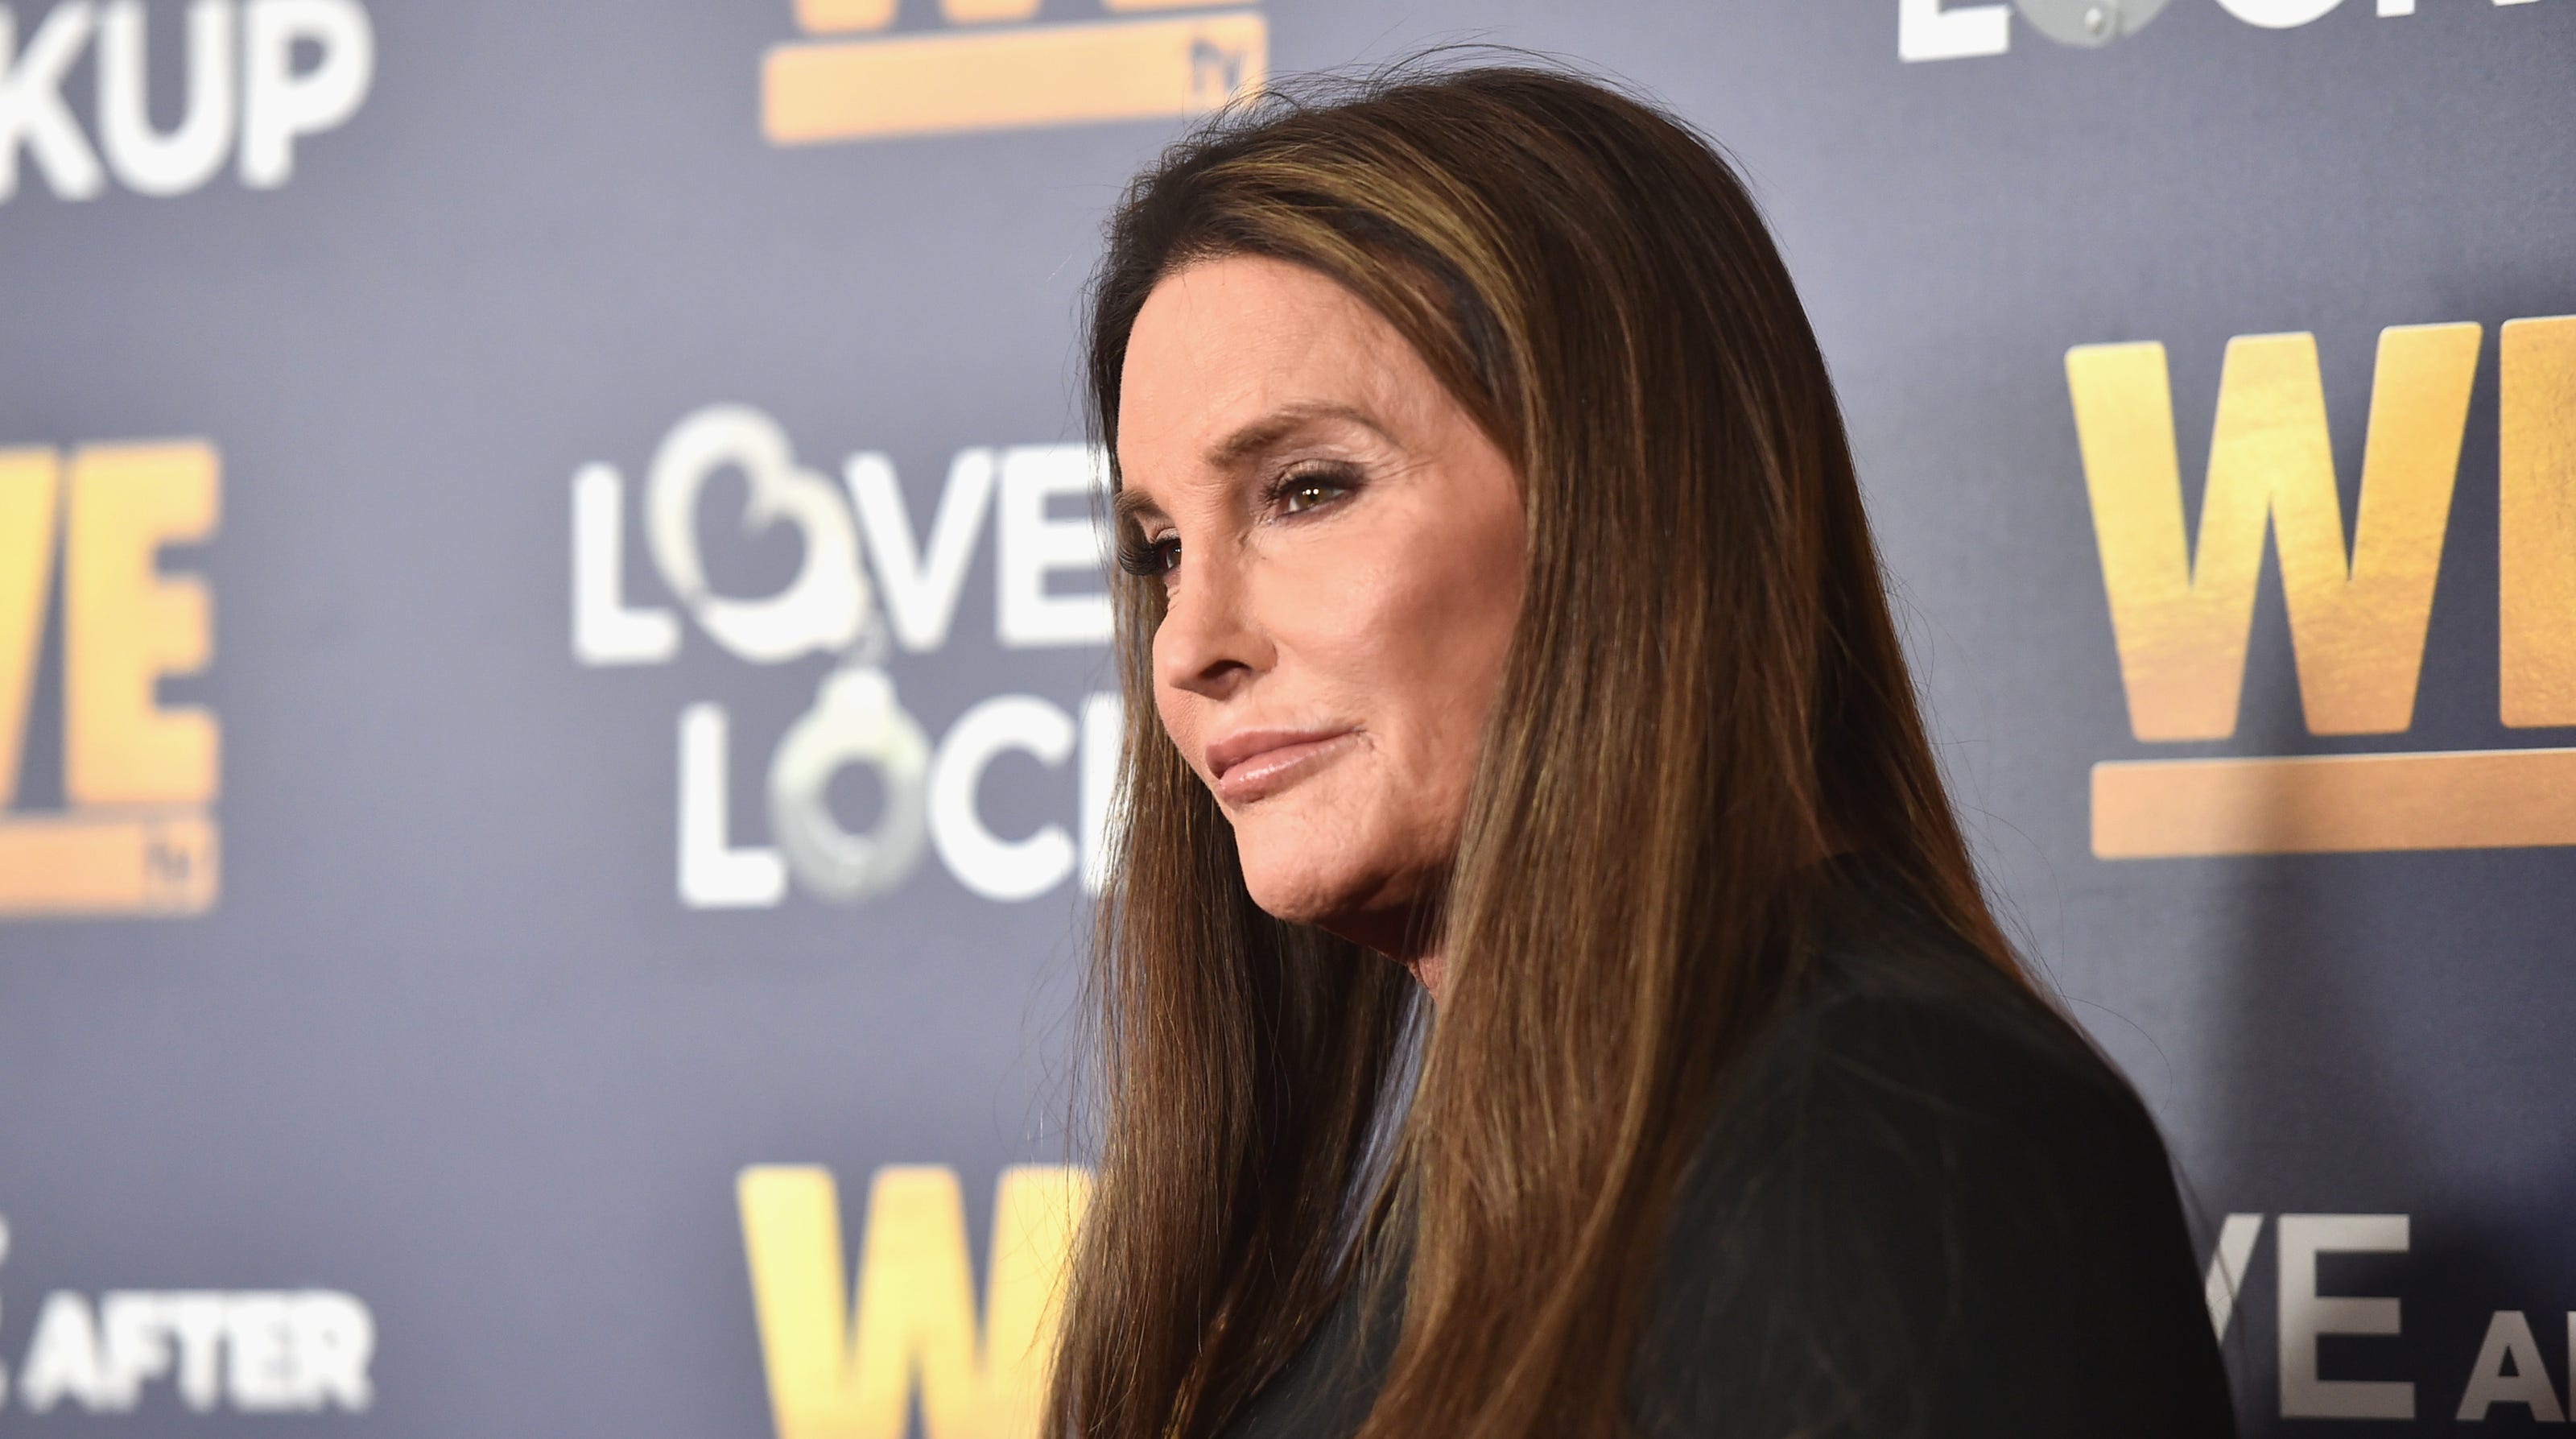 Caitlyn Jenner Runs For Governor Her Past Remarks On Republican Views 